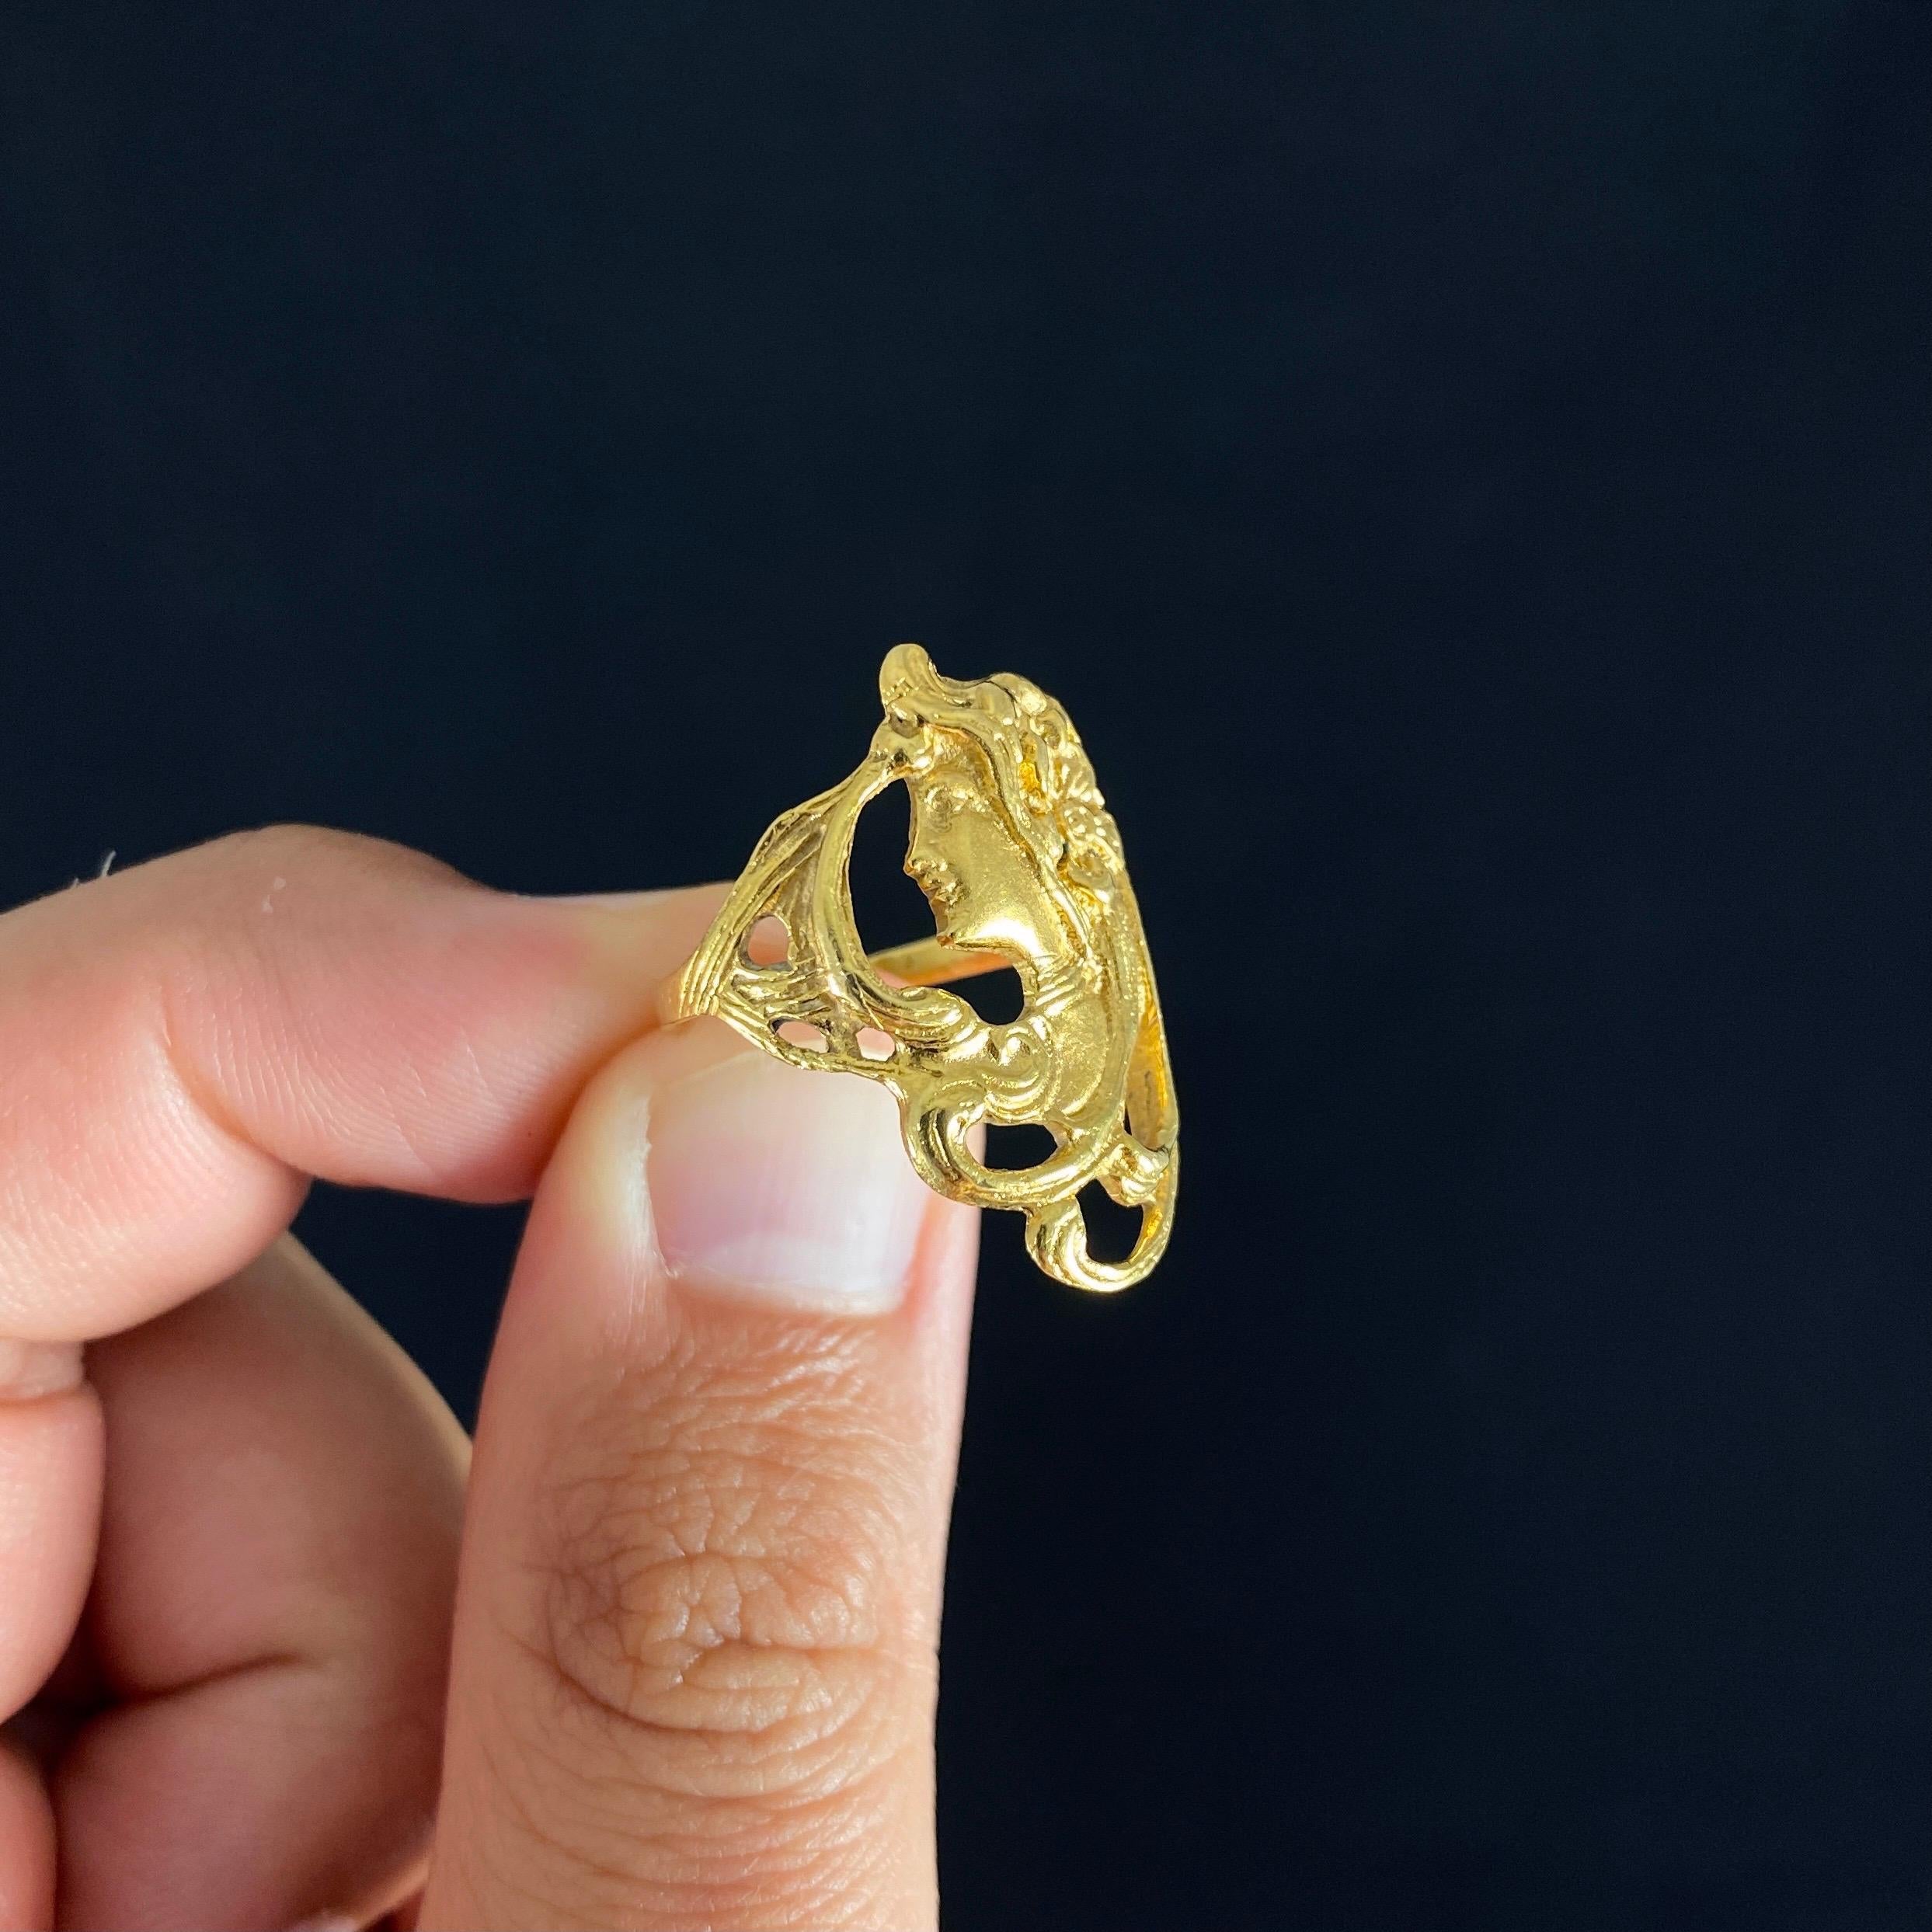 Vintage 1980s Art Nouveau Style Female Figure Openwork Ring Yellow Gold Signed 4